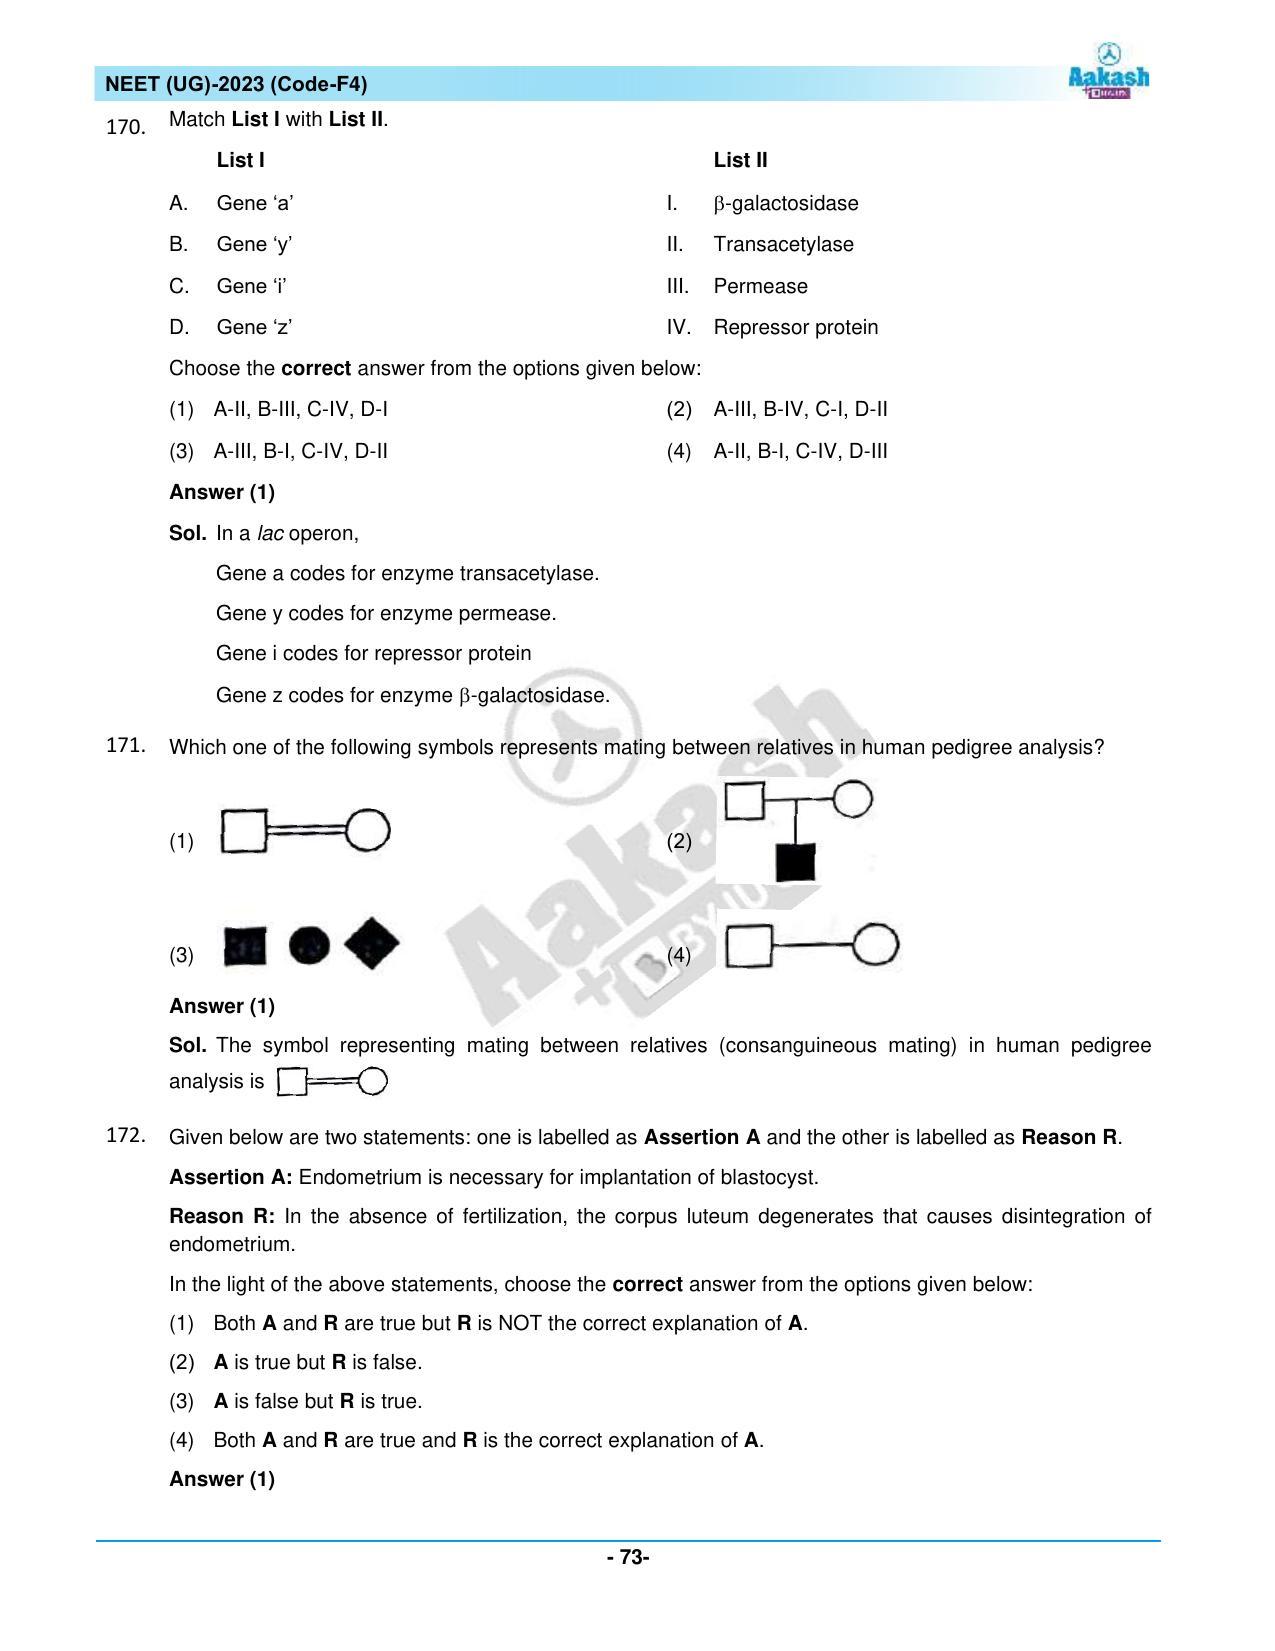 NEET 2023 Question Paper F4 - Page 73